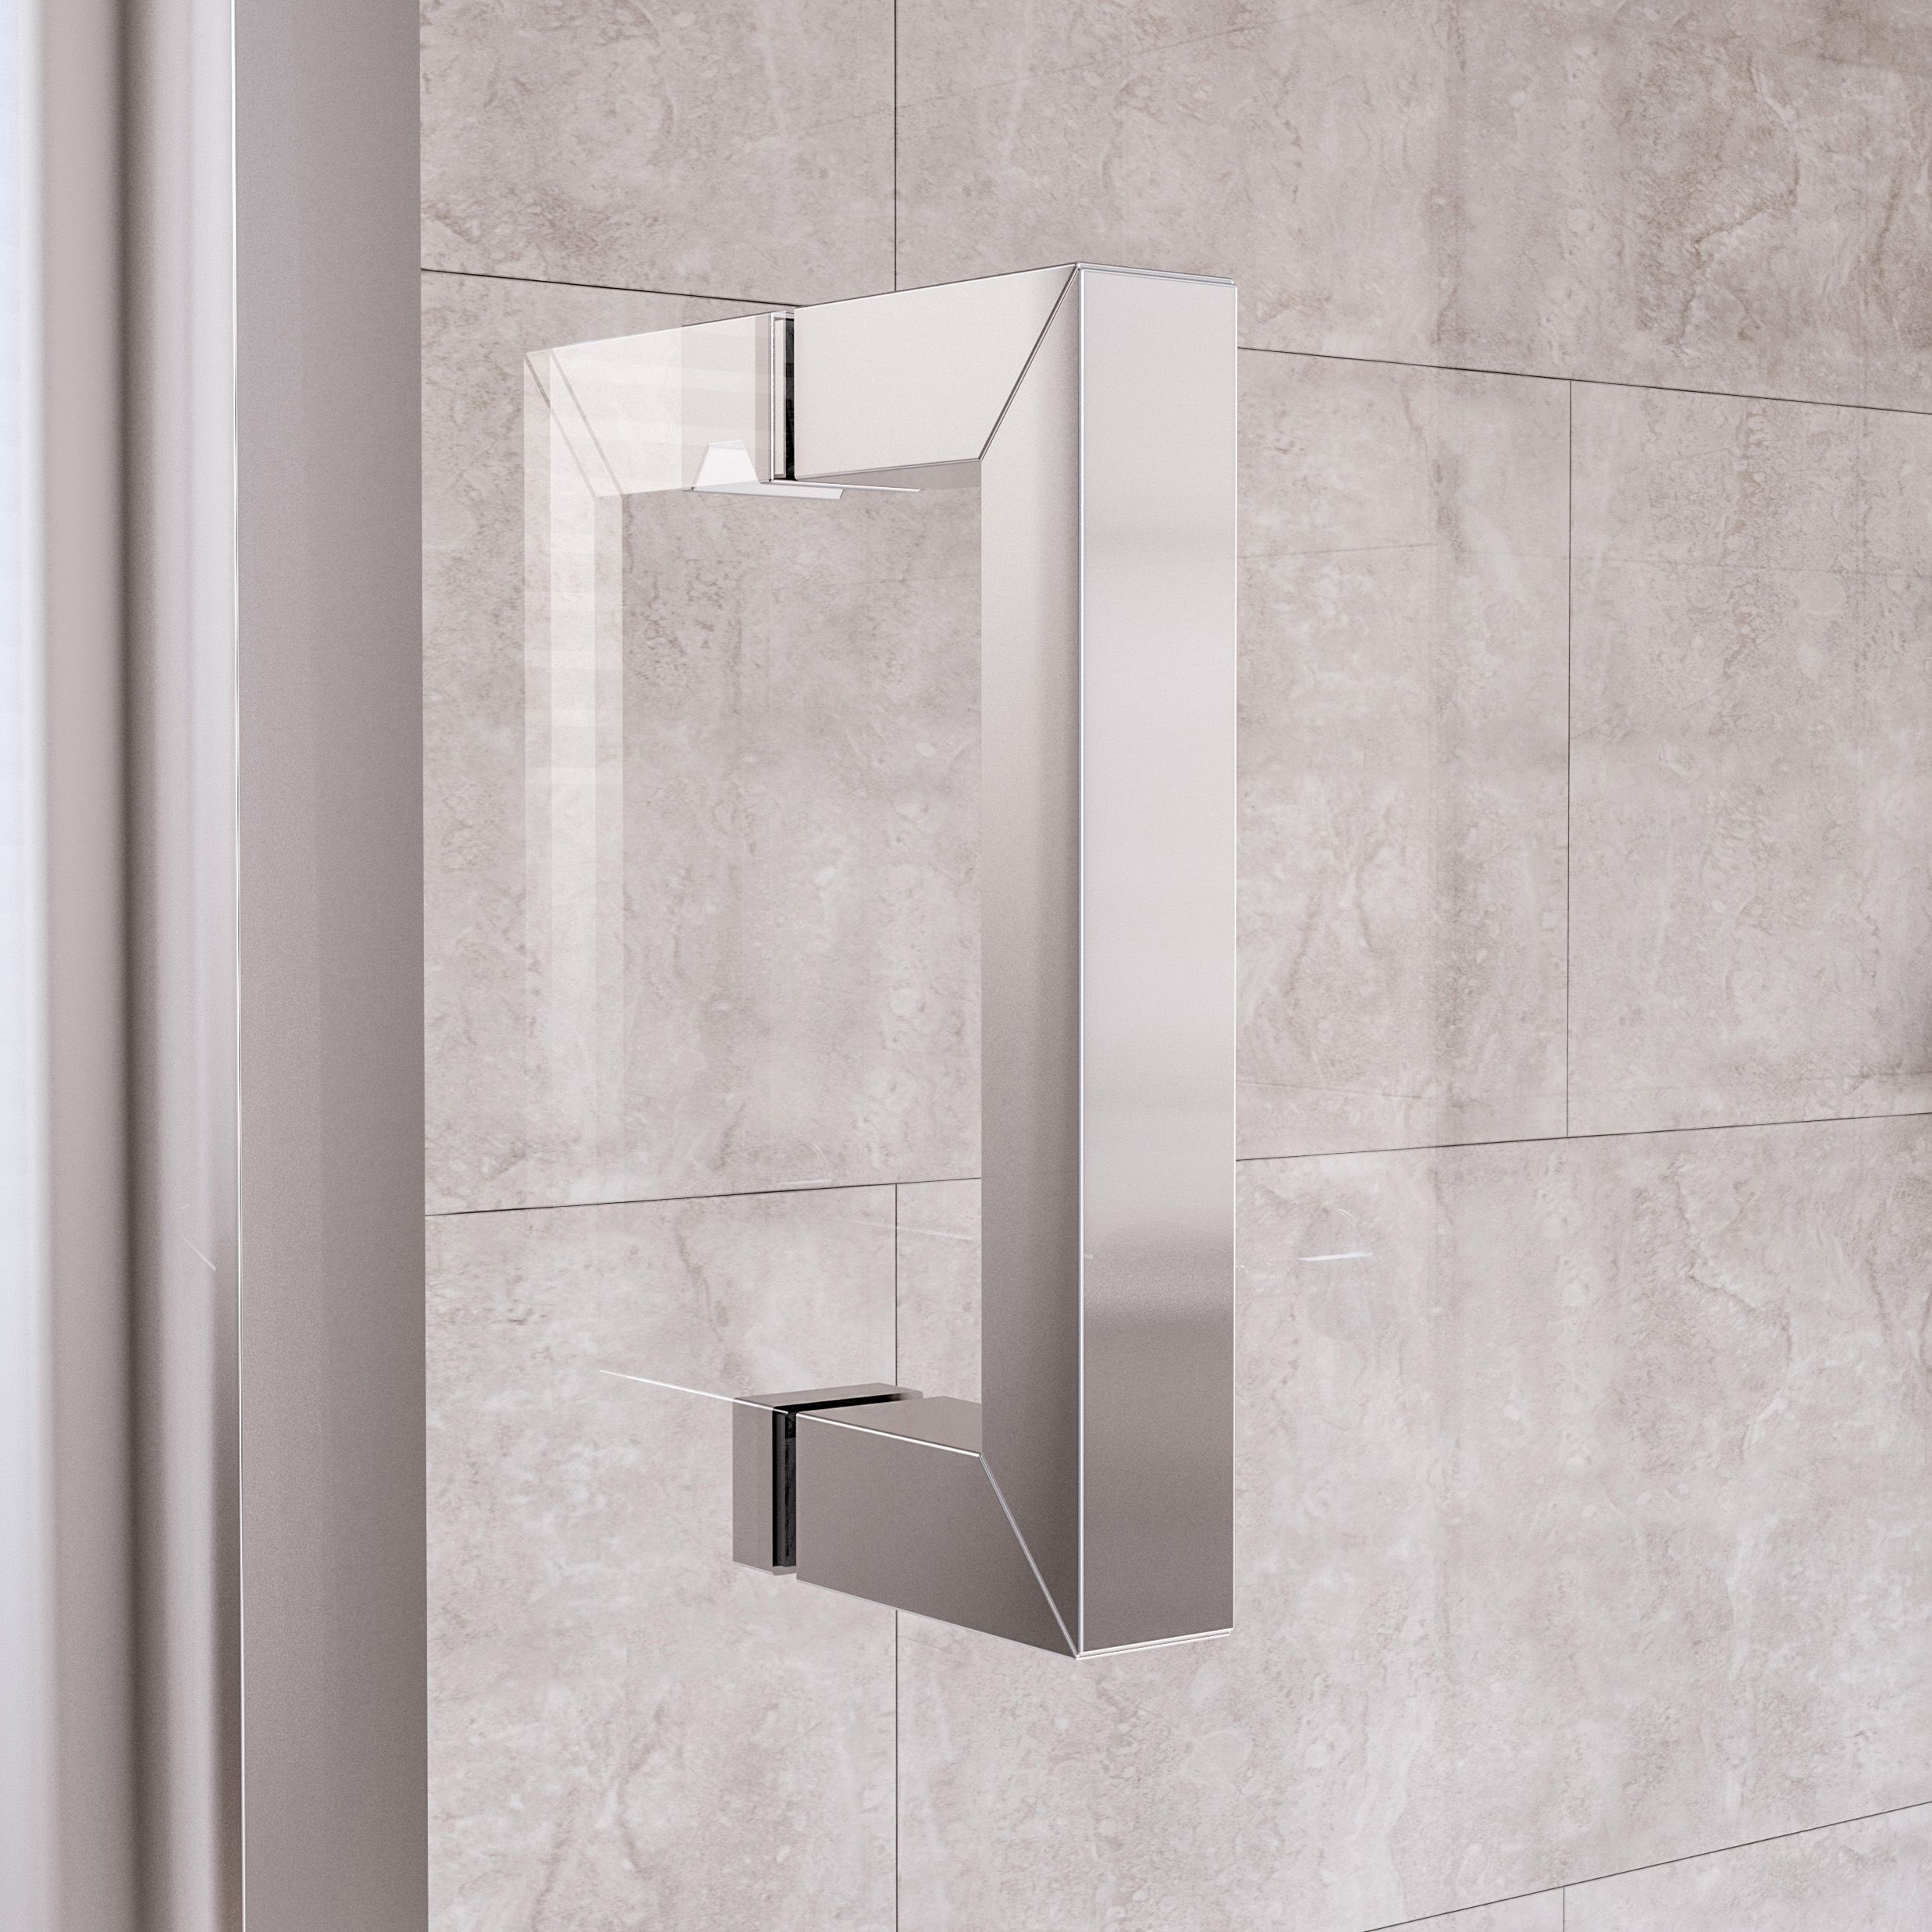 Aqualux Edge 8 Semi-framed Silver effect Clear glass Sliding Shower Door with 80cm side panel (H)203.5cm (W)120cm